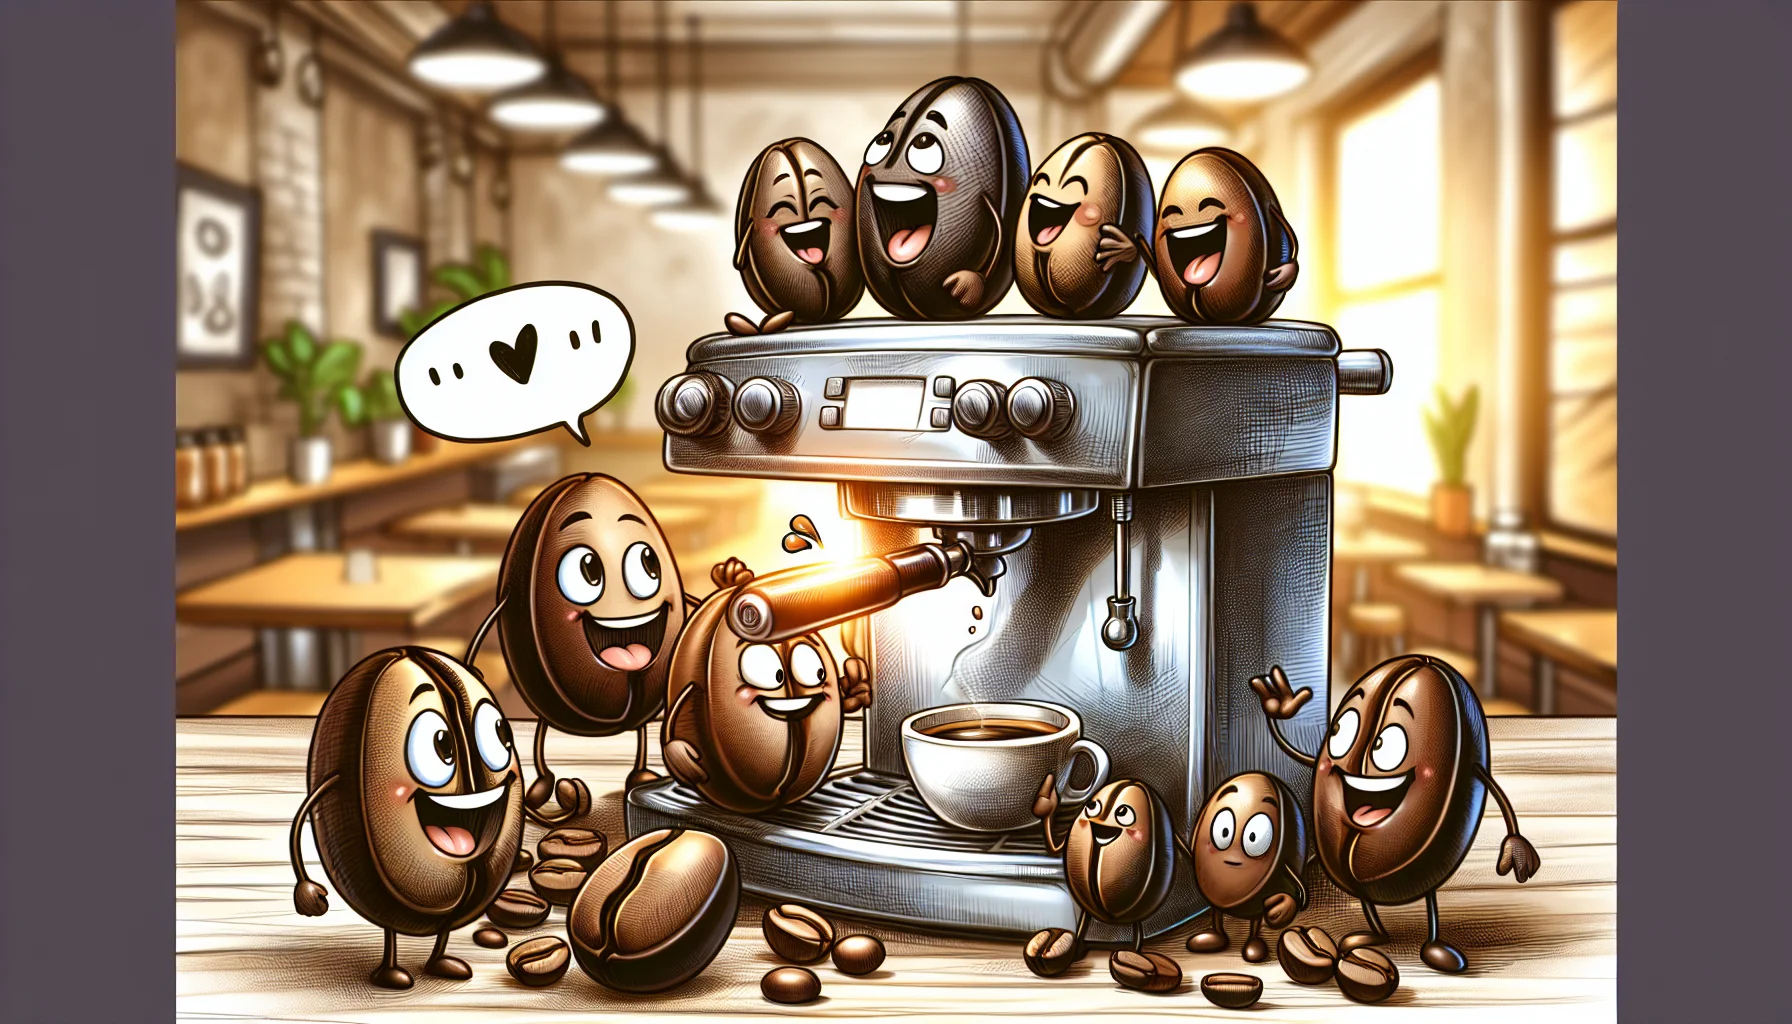 Draw a high-quality, realistic image featuring different types of beans known for making delicious espresso coffee. Show them in a fun and quirky scenario where they are gathered around a tiny coffee machine, eagerly waiting their turn to be brewed into espresso. Some are laughing, others are encouraging each other, capturing a lighthearted camaraderie. In the background, use warm colors to create an inviting and cozy coffee shop atmosphere, making people feel enticed to enjoy a rich cup of espresso.